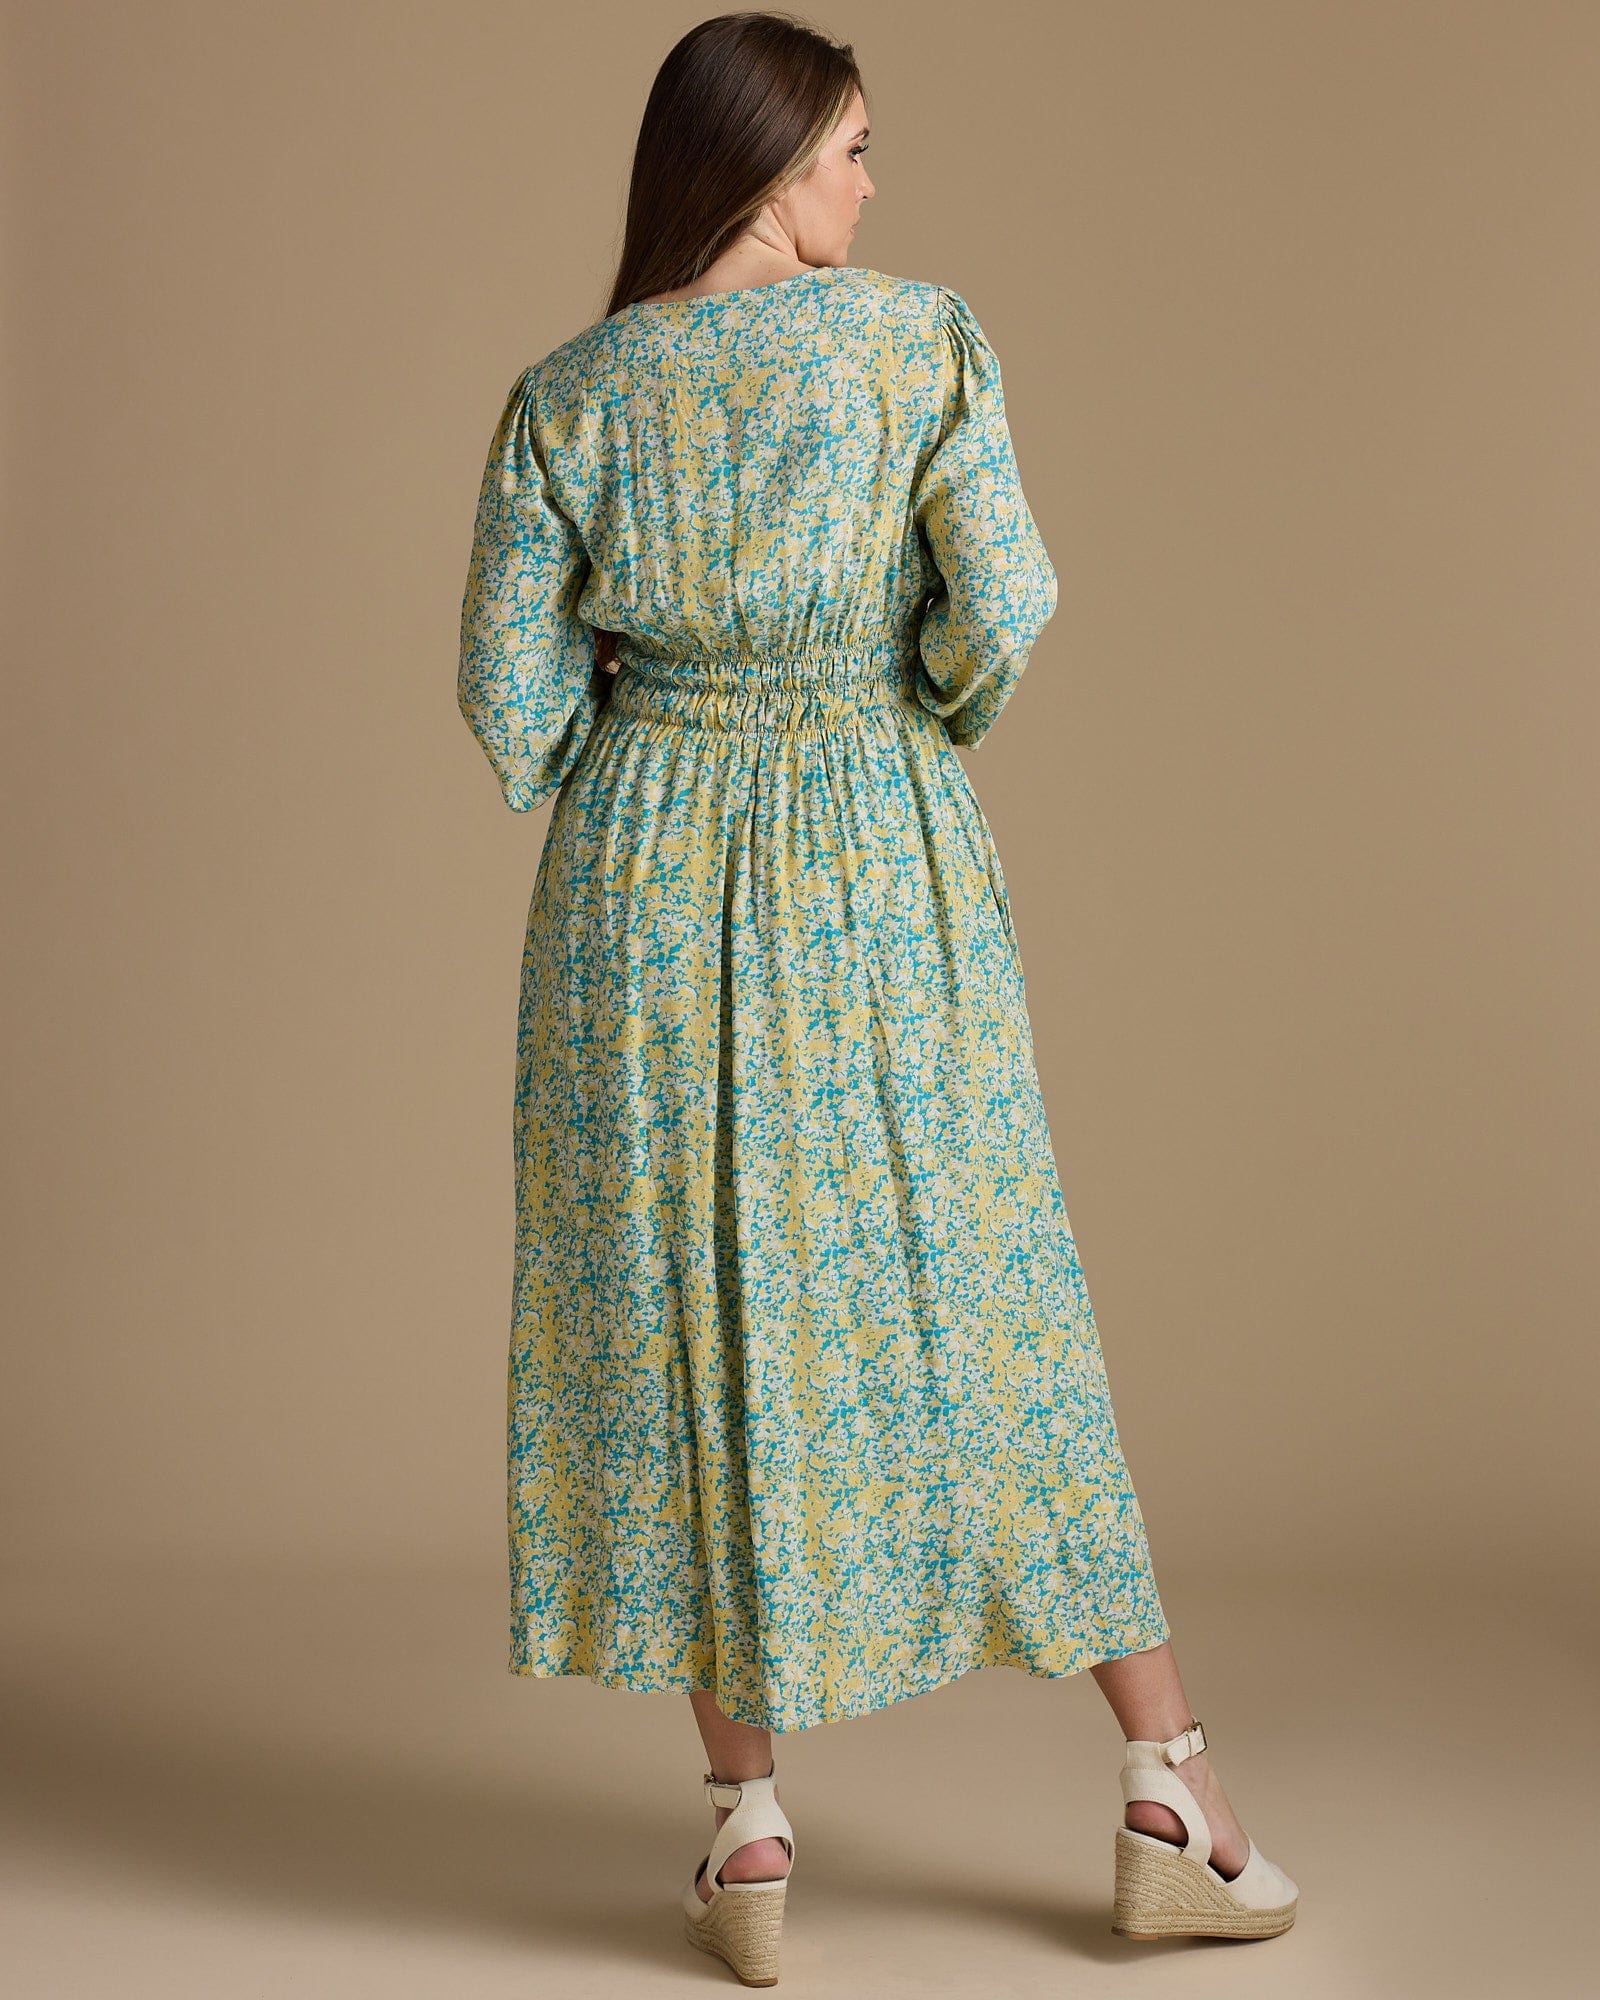 Woman in a long sleeve, maxi length, yellow and green floral print dress